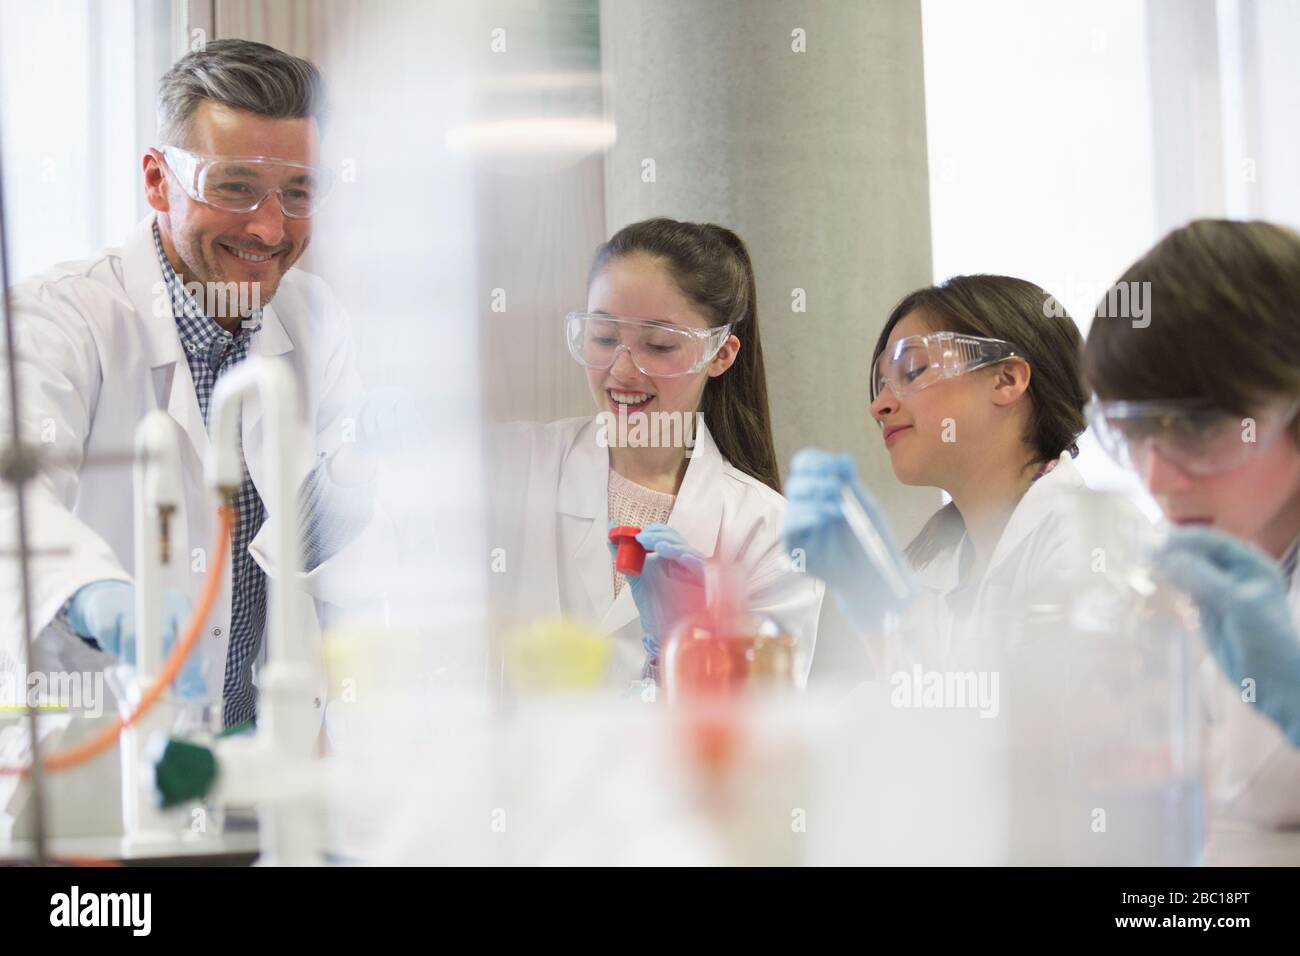 Male teacher and students conducting scientific experiment in laboratory classroom Stock Photo